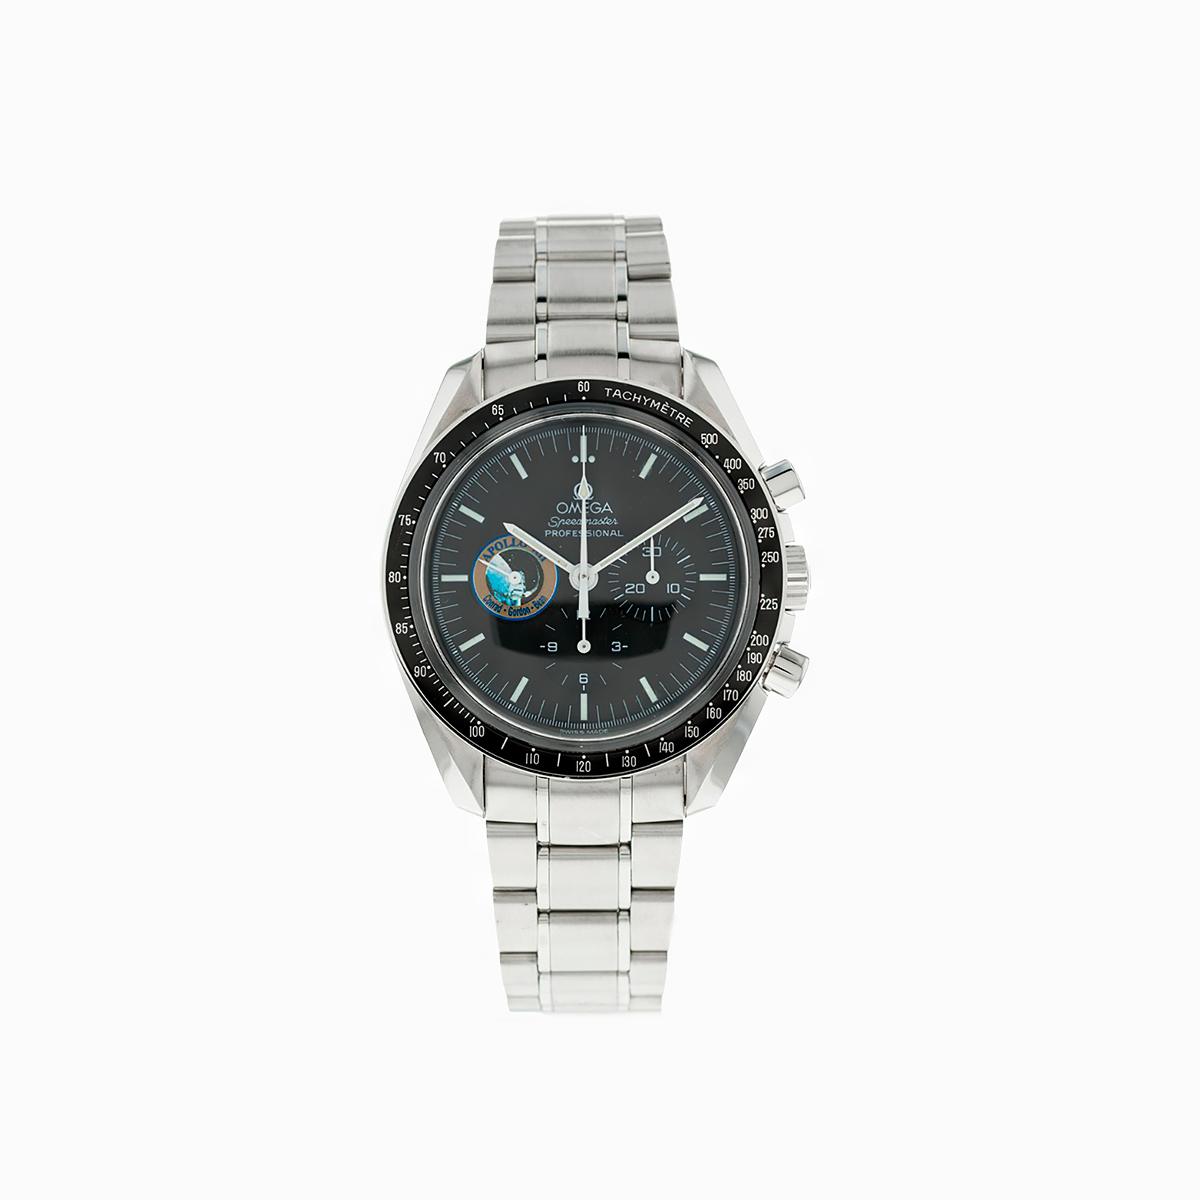 Omega Speedmaster Professional Moonwatch Missions Apollo XII 3597.16.00